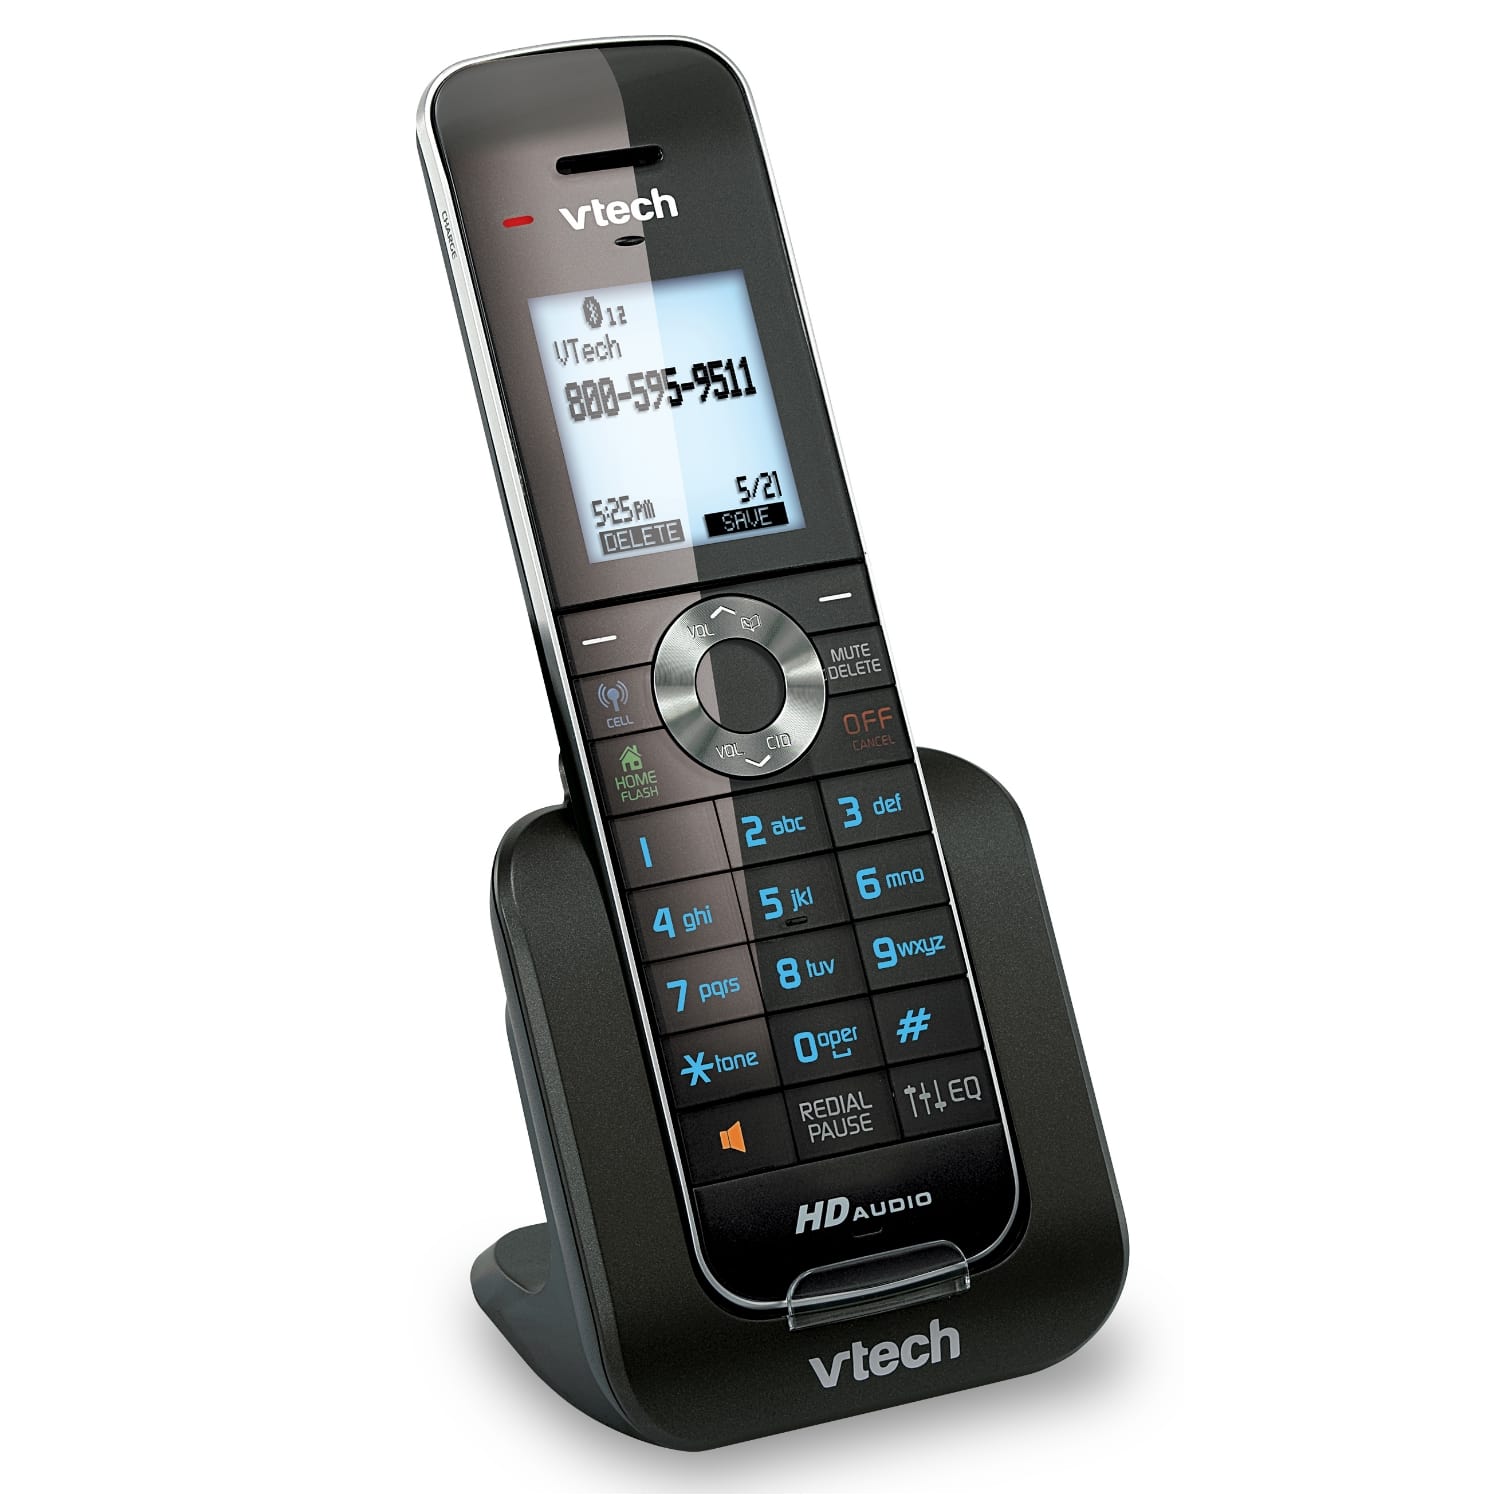 Accessory handset with Caller ID/Call Waiting